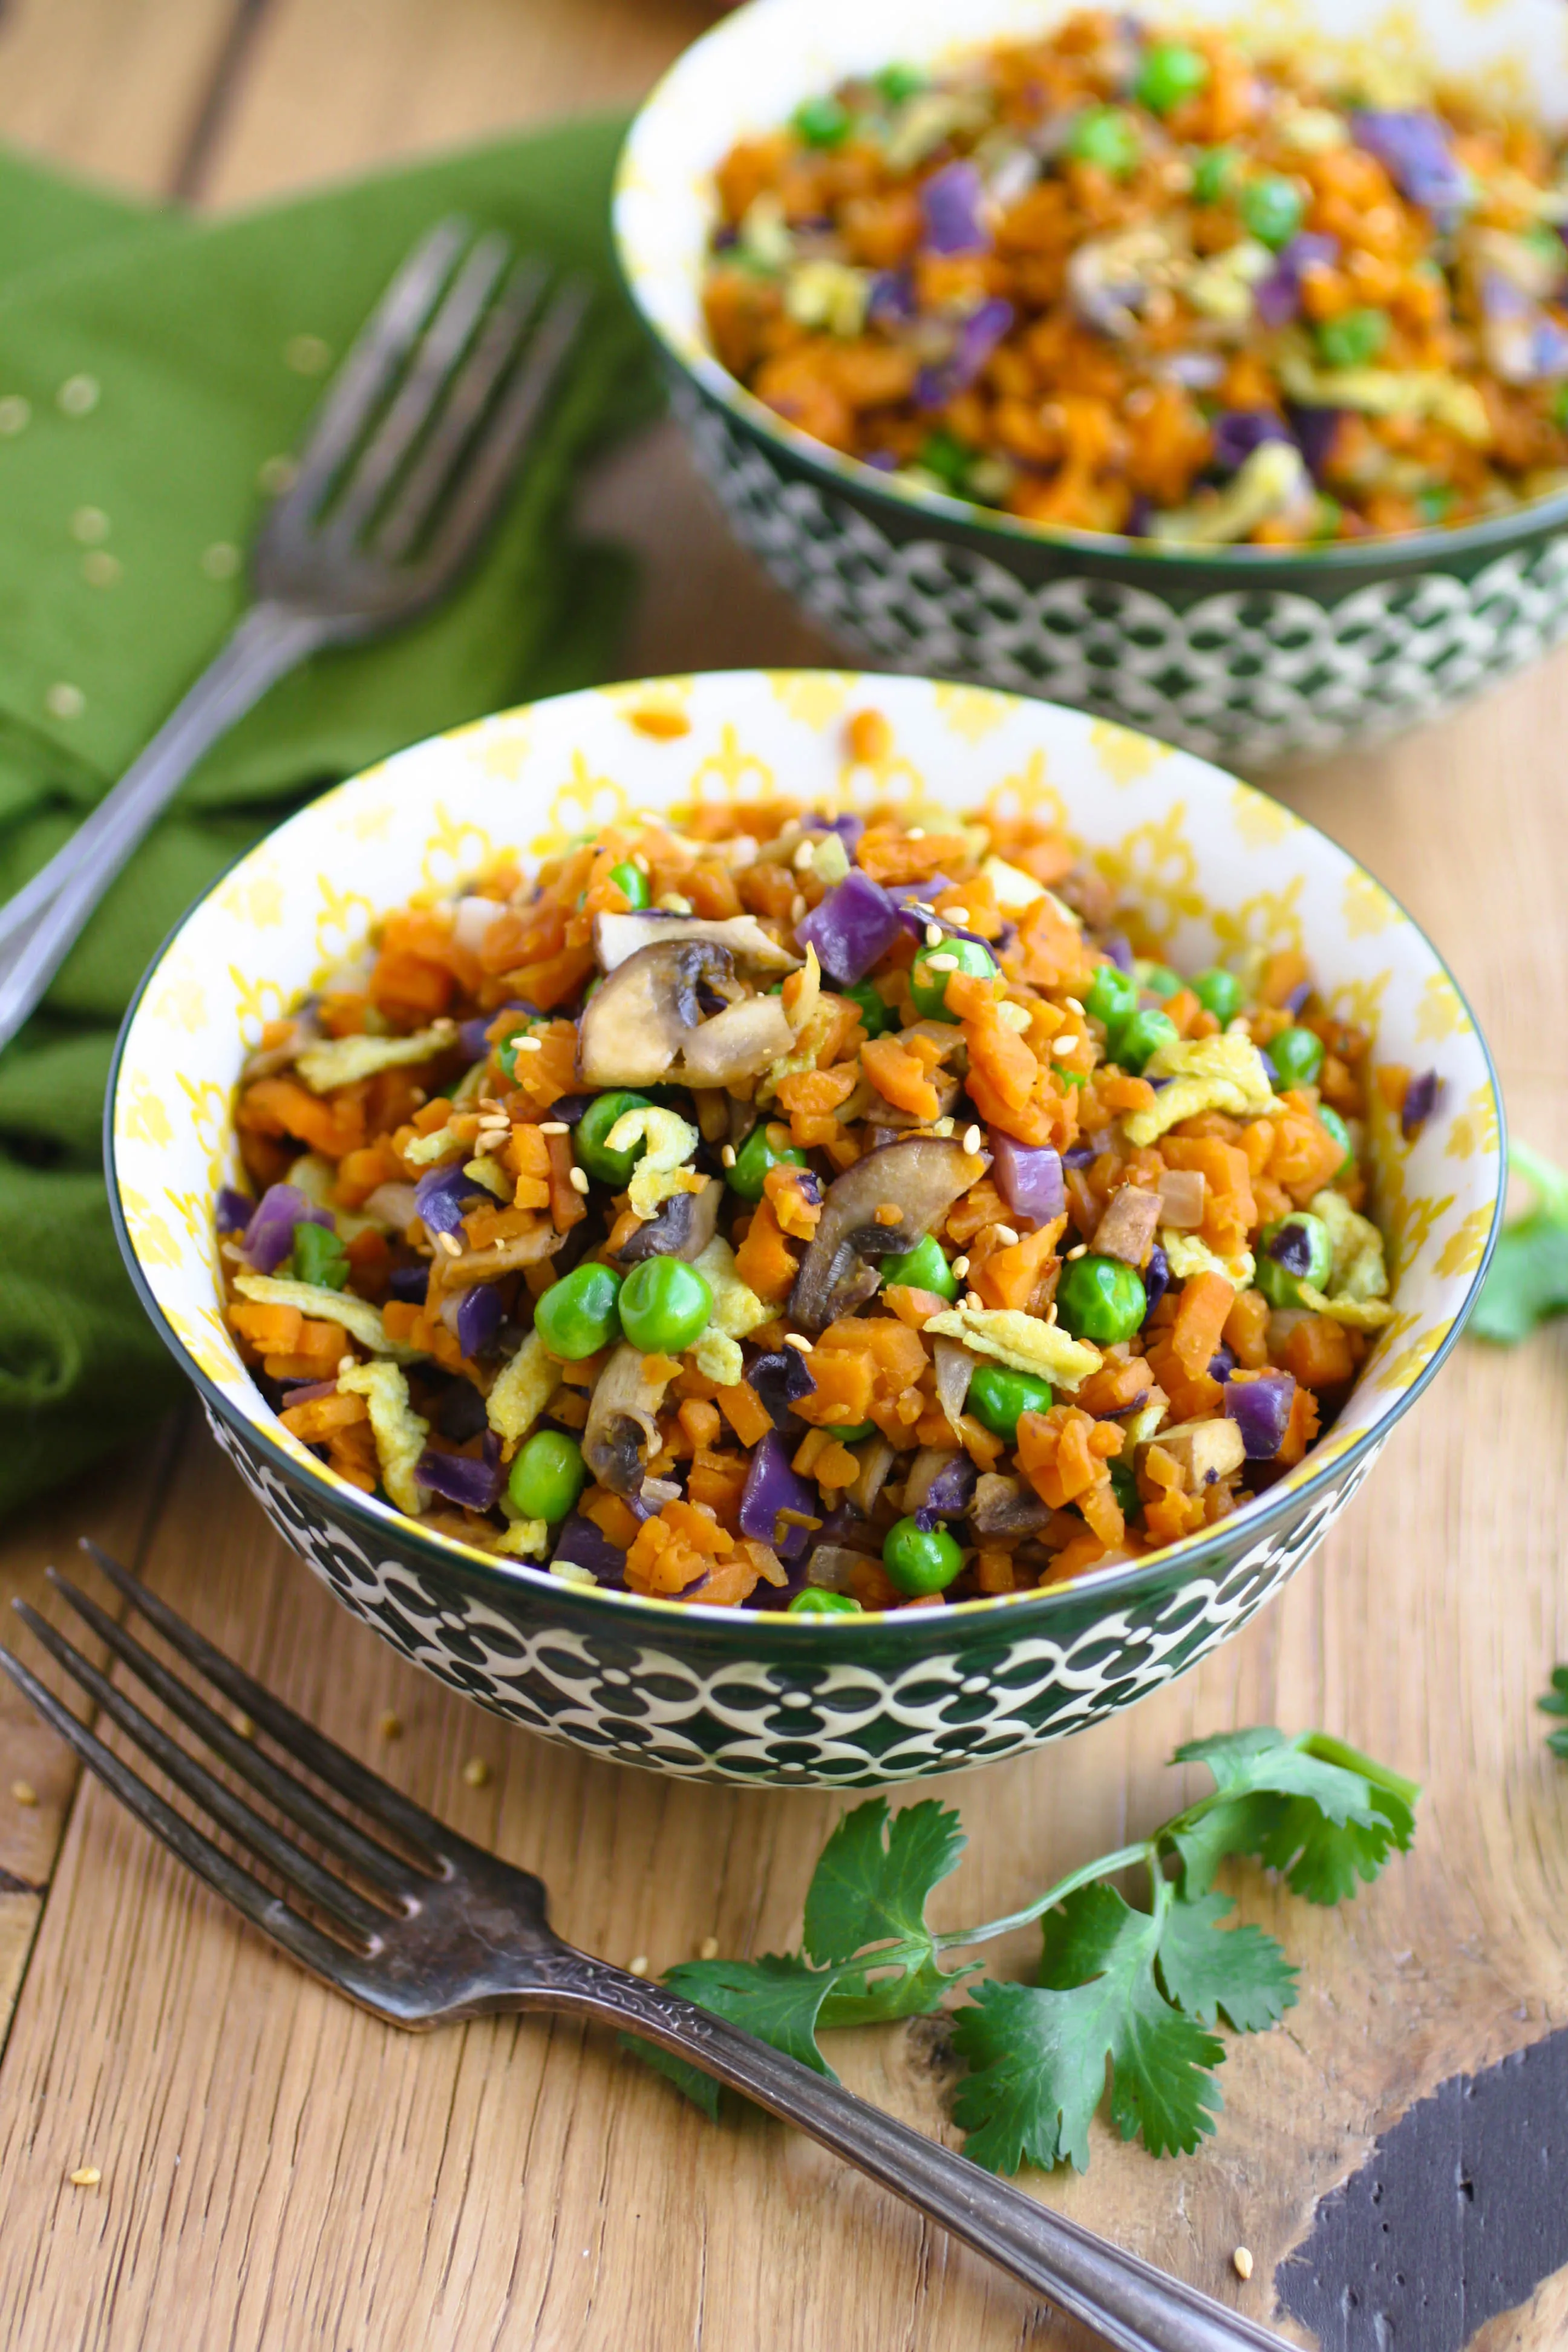 Sweet Potato "Fried Rice" is a colorful and flavorful dish. It makes a fab meatless side dish, or even main dish!